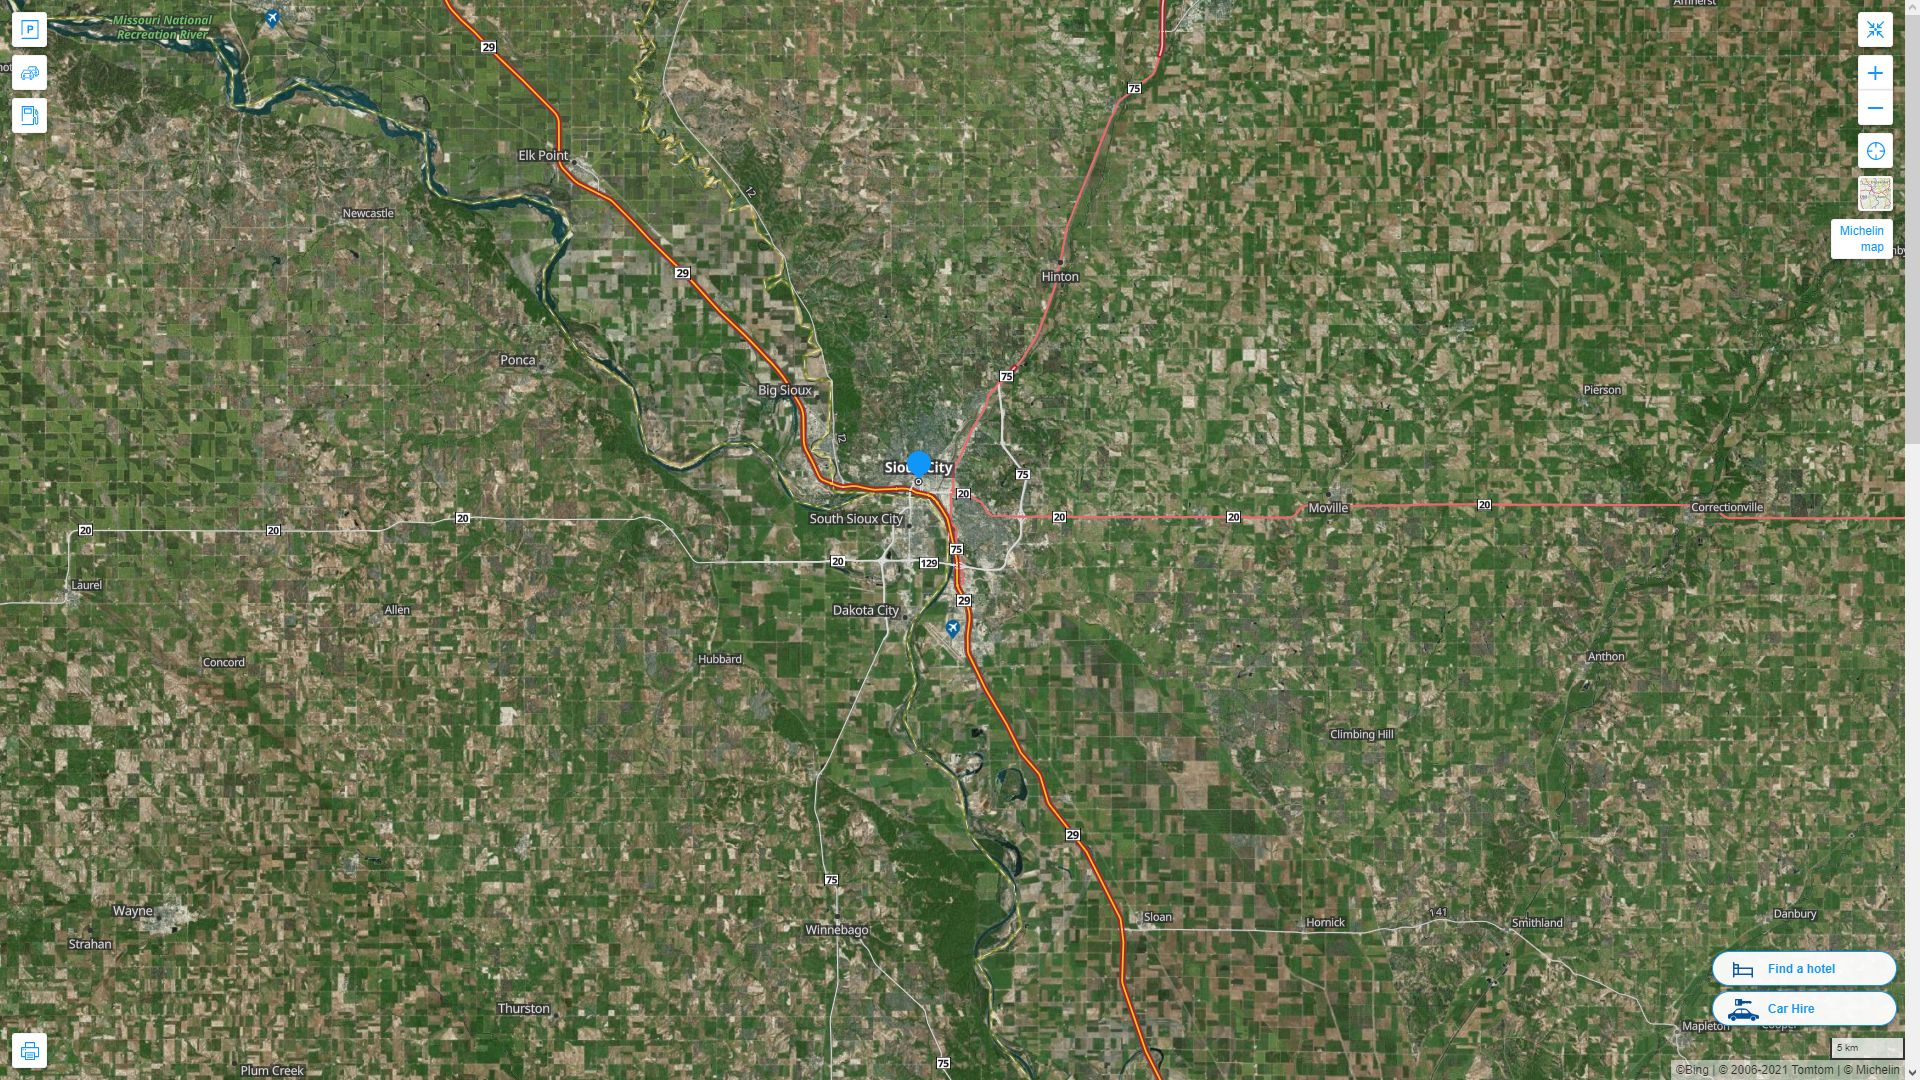 Sioux City iowa Highway and Road Map with Satellite View